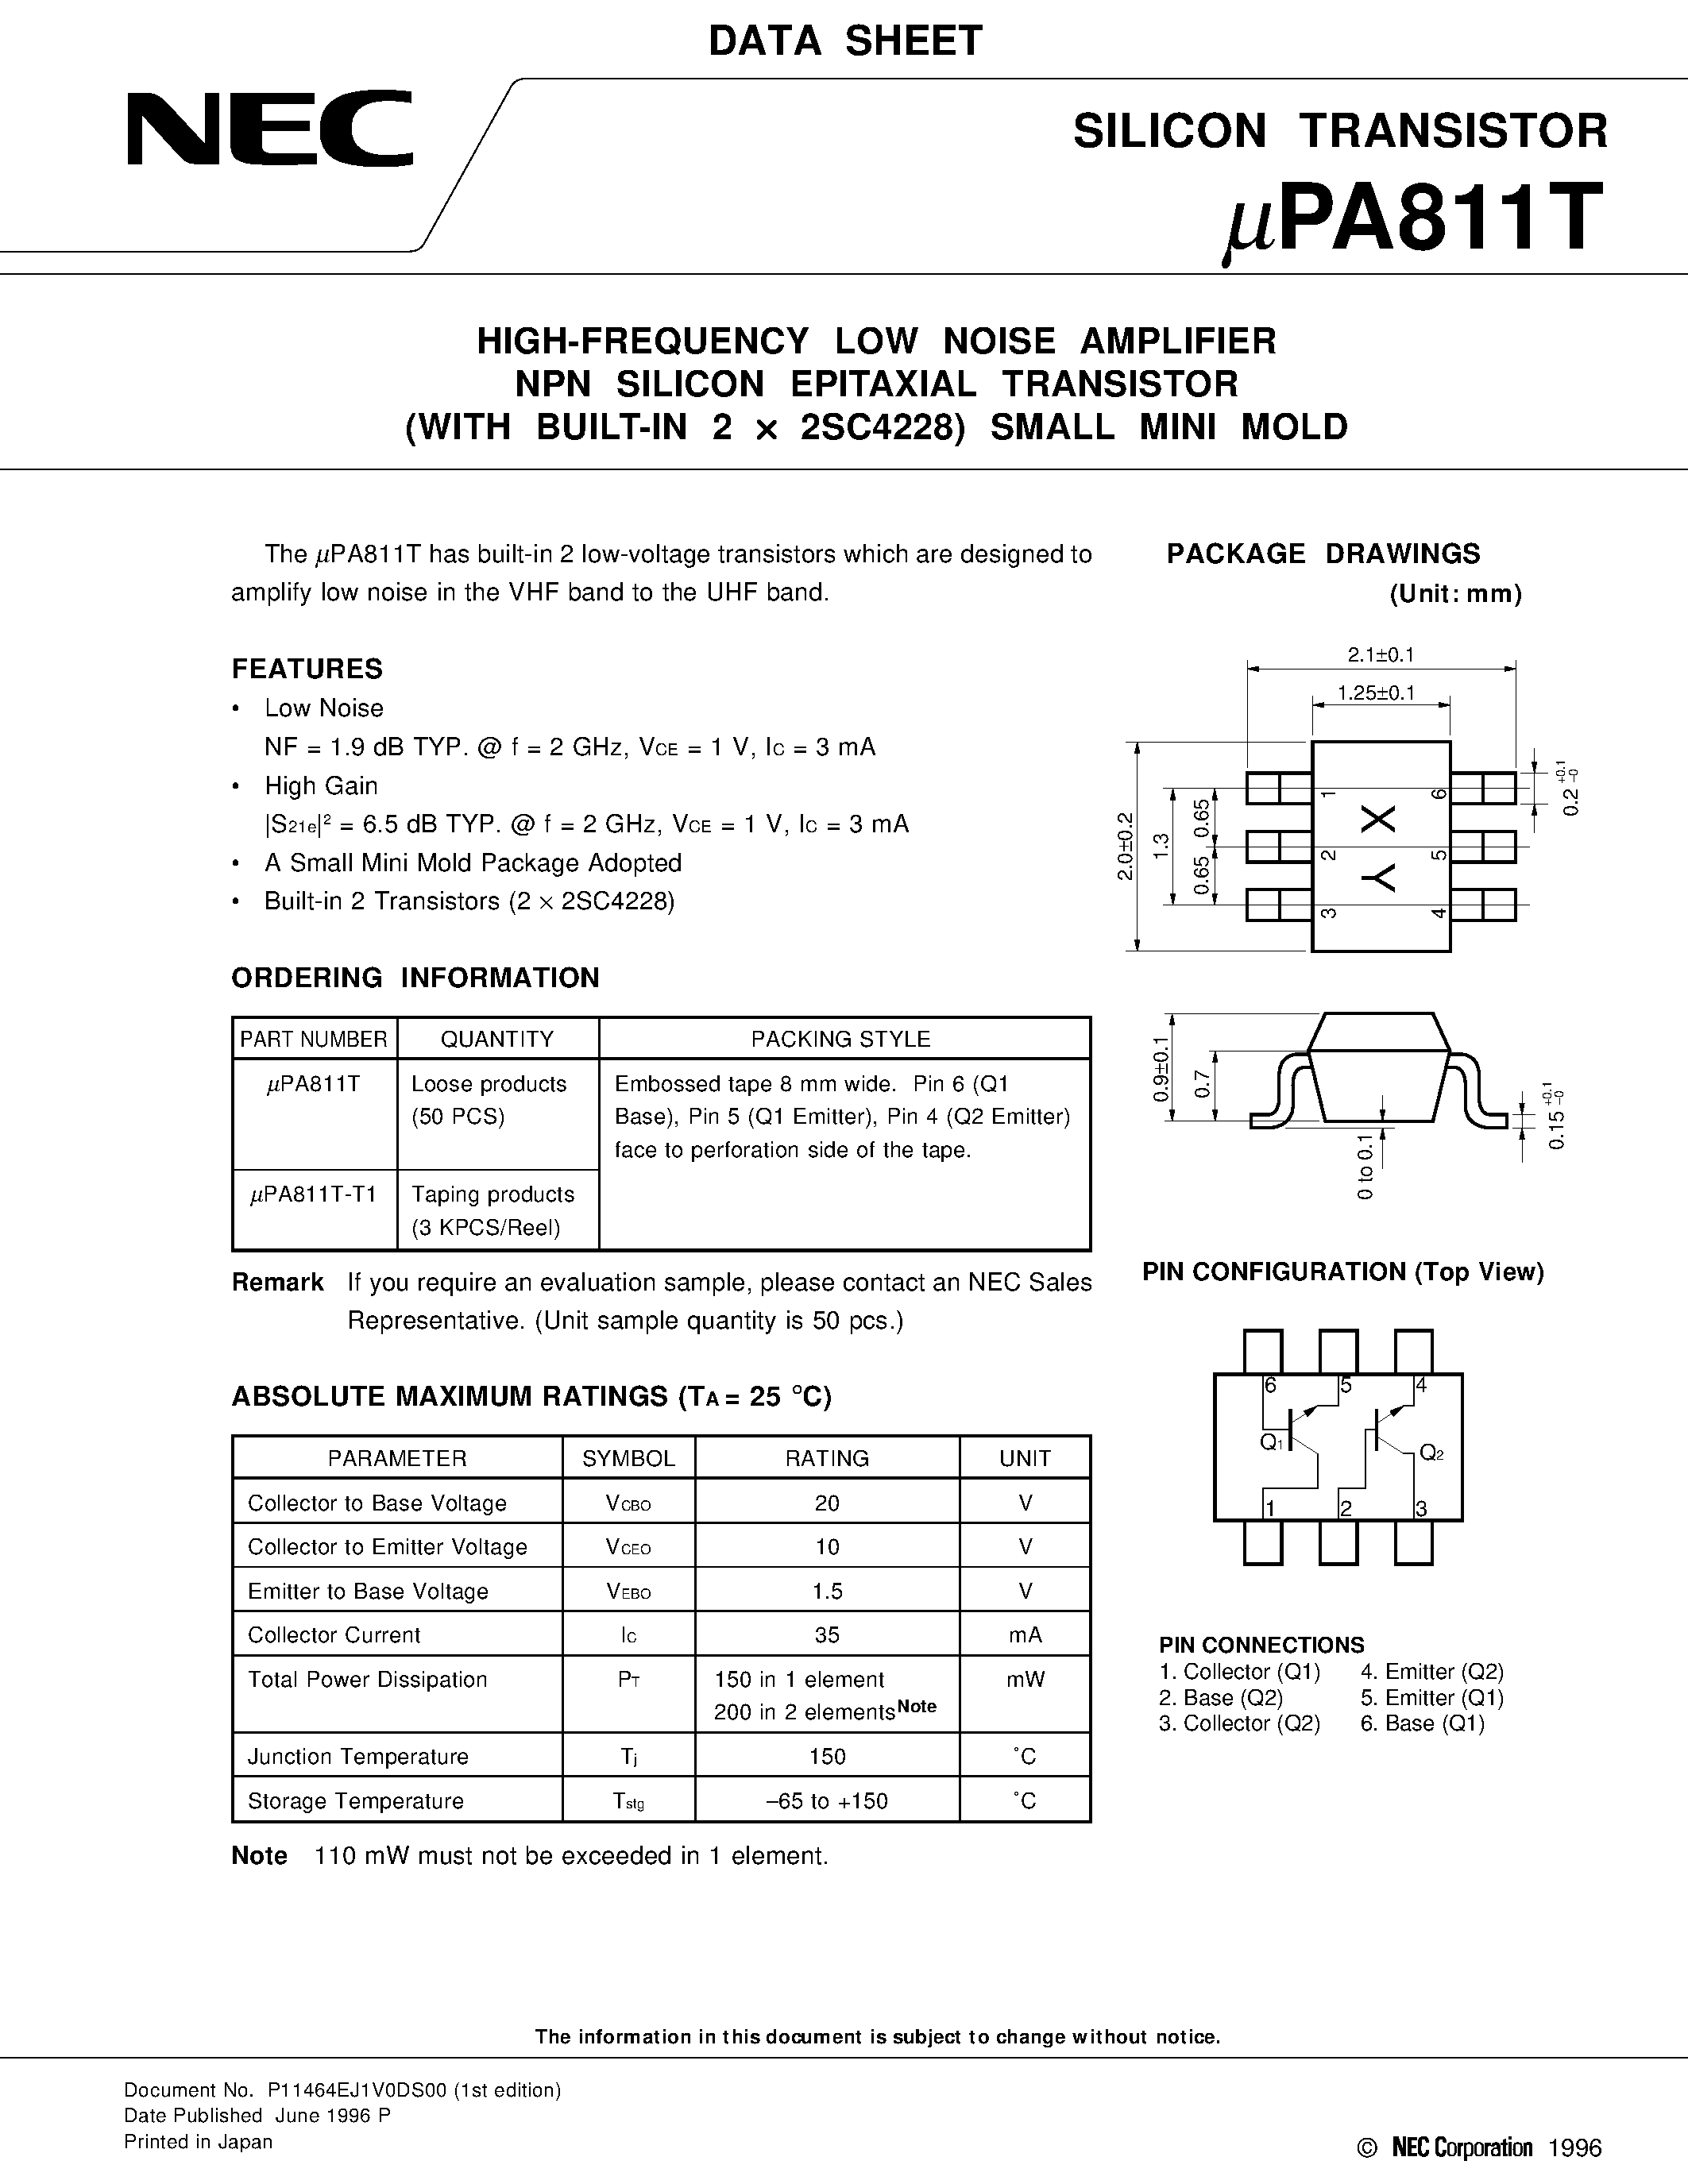 Datasheet UPA811 - HIGH-FREQUENCY LOW NOISE AMPLIFIER NPN SILICON EPITAXIAL TRANSISTOR WITH BUILT-IN 2 x 2SC4228 SMALL MINI MOLD page 1